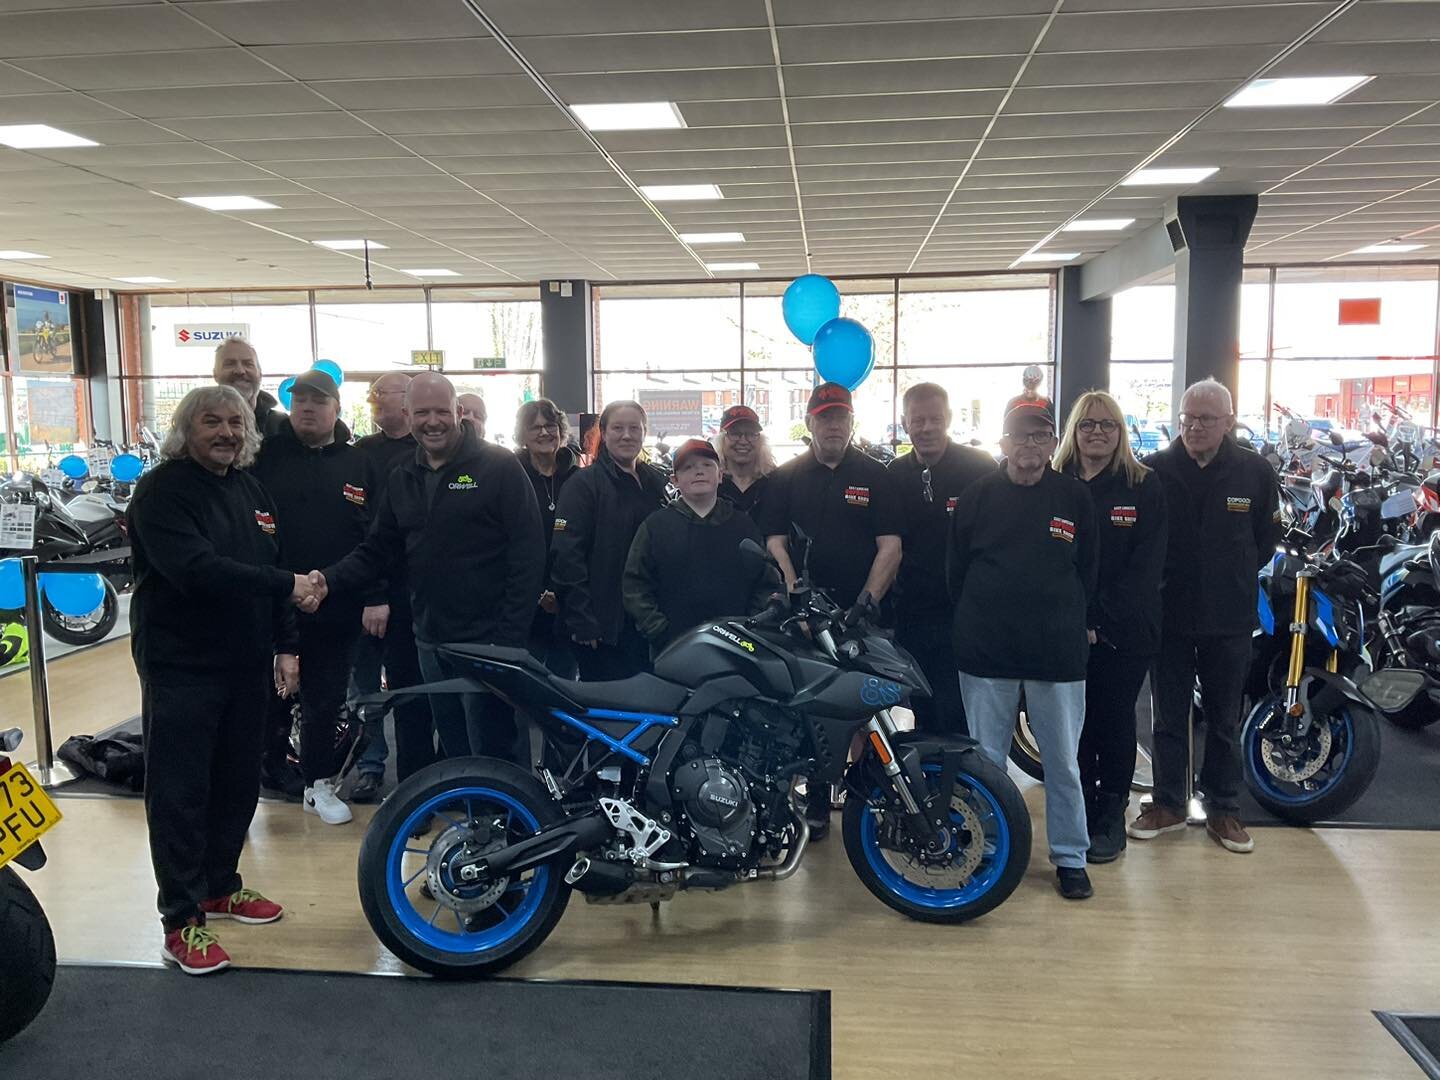 Today we collected this year&rsquo;s Prize Draw Bike, Suzuki GSX-8S, from our friends at Orwell Motorcycles Ltd.

It could be yours for a little as &pound;1, with 💯% of ticket sales going to charity. Tickets will be on sale soon.

#eacbs #bikeshow #